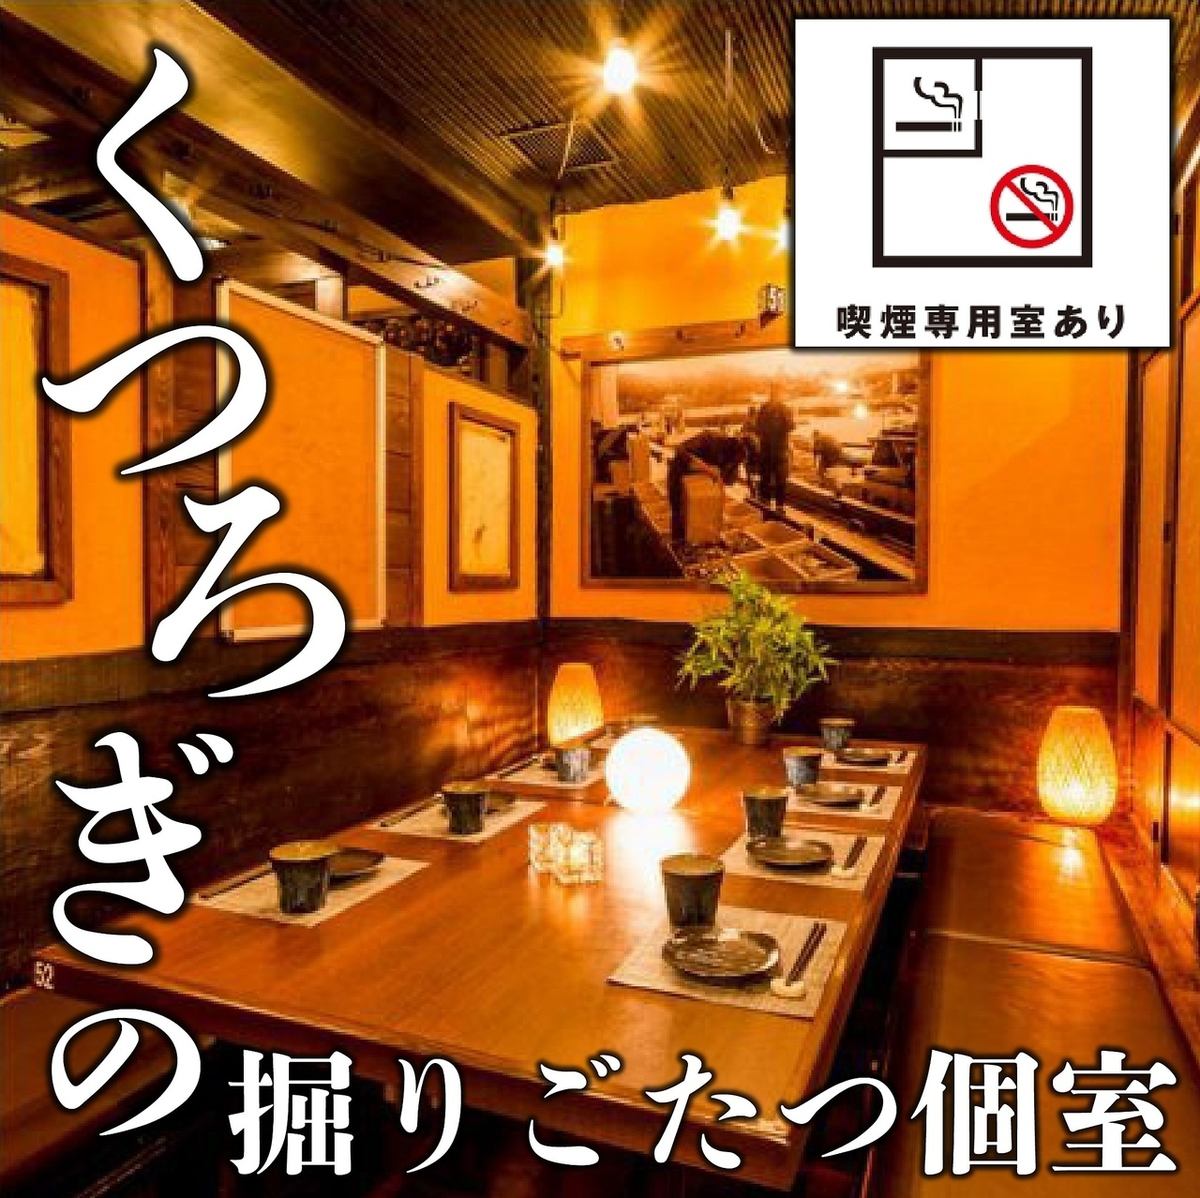 3 minutes walk from Ueno Station! The restaurant has a calm atmosphere. Many private rooms are also available!